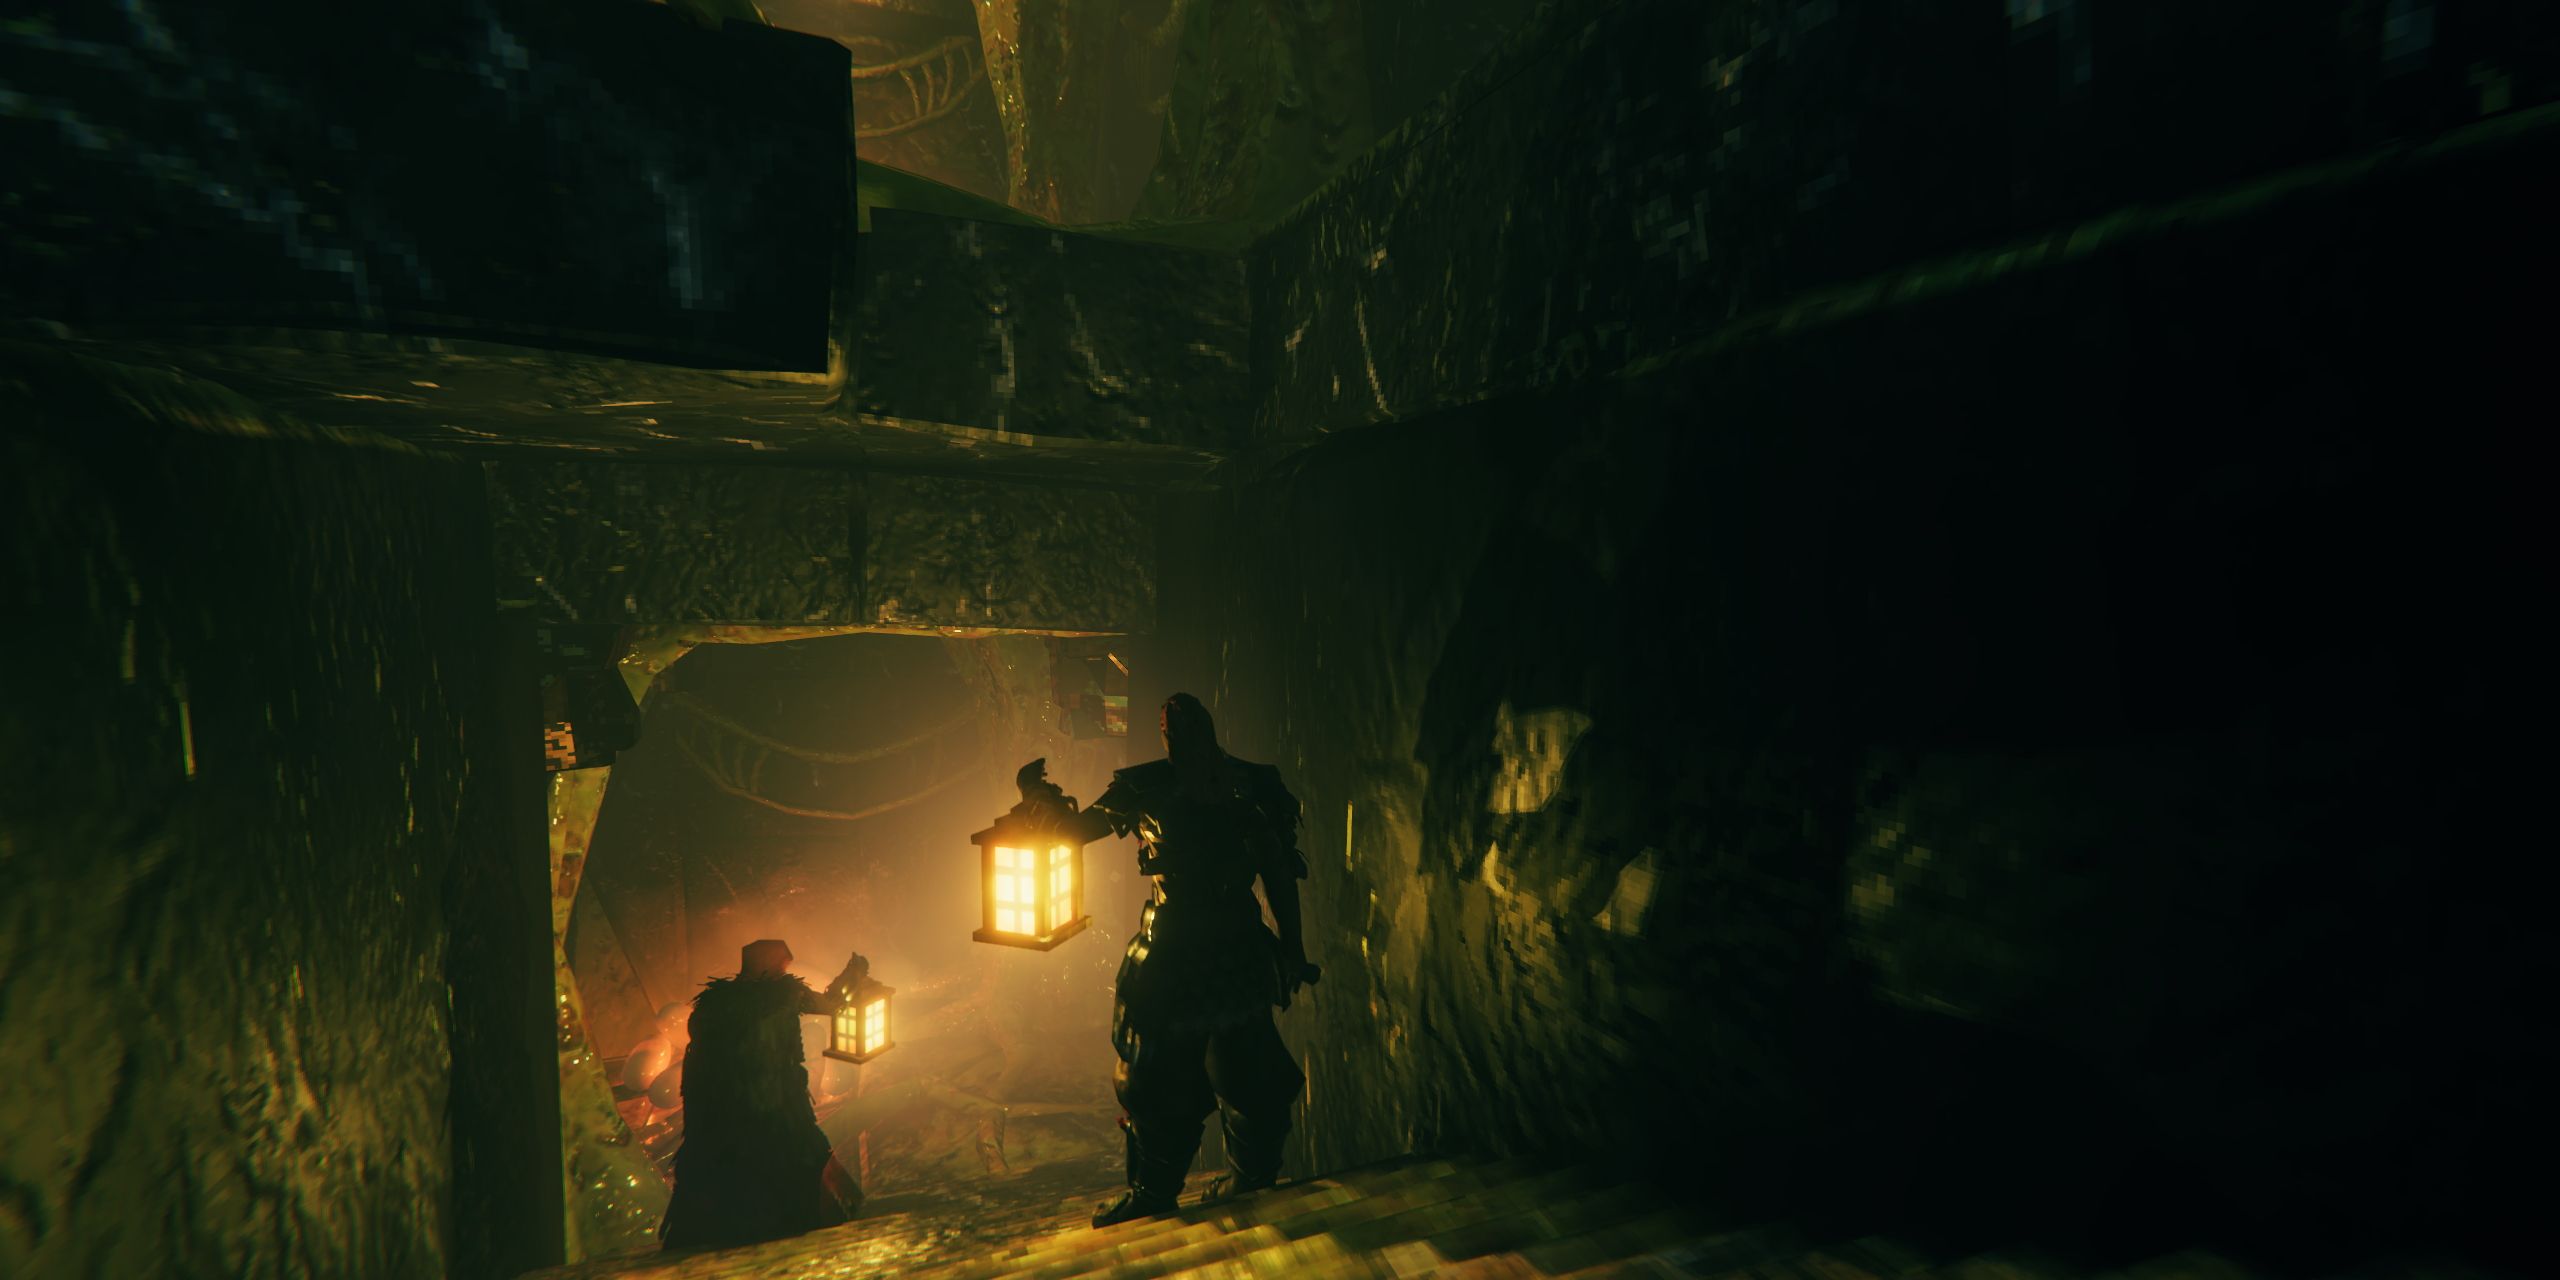 2 characters enter a dark dungeon in the misty lands of Valheim.